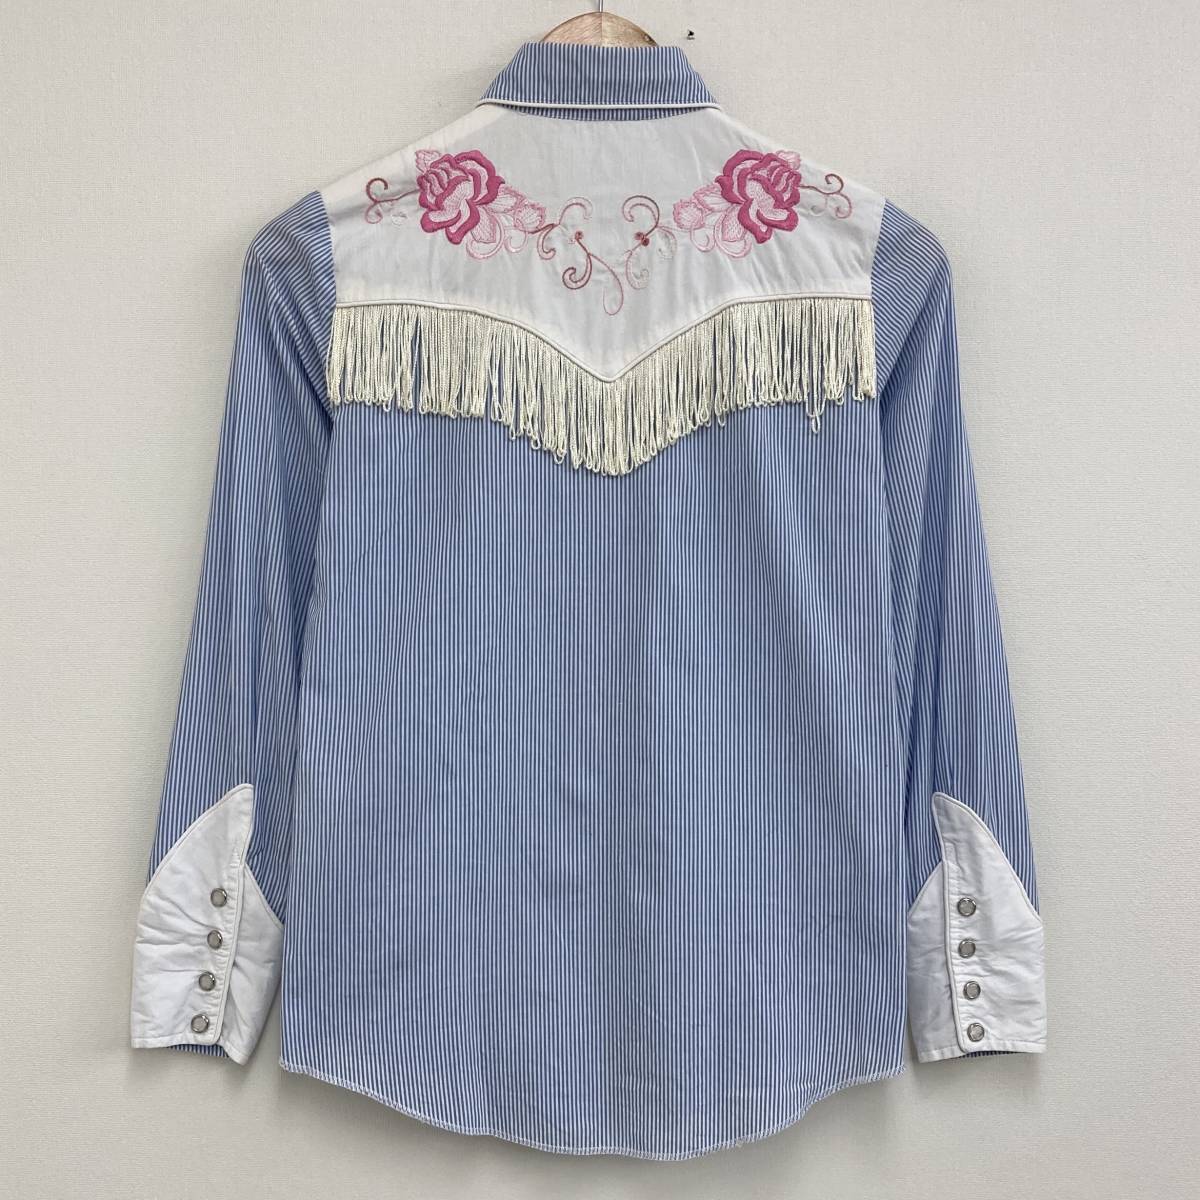 AD1999 Aoyama Comme des Garcons × H BAR C America made long sleeve western shirt fringe embroidery stripe S size 90s VINTAGE archive 1055